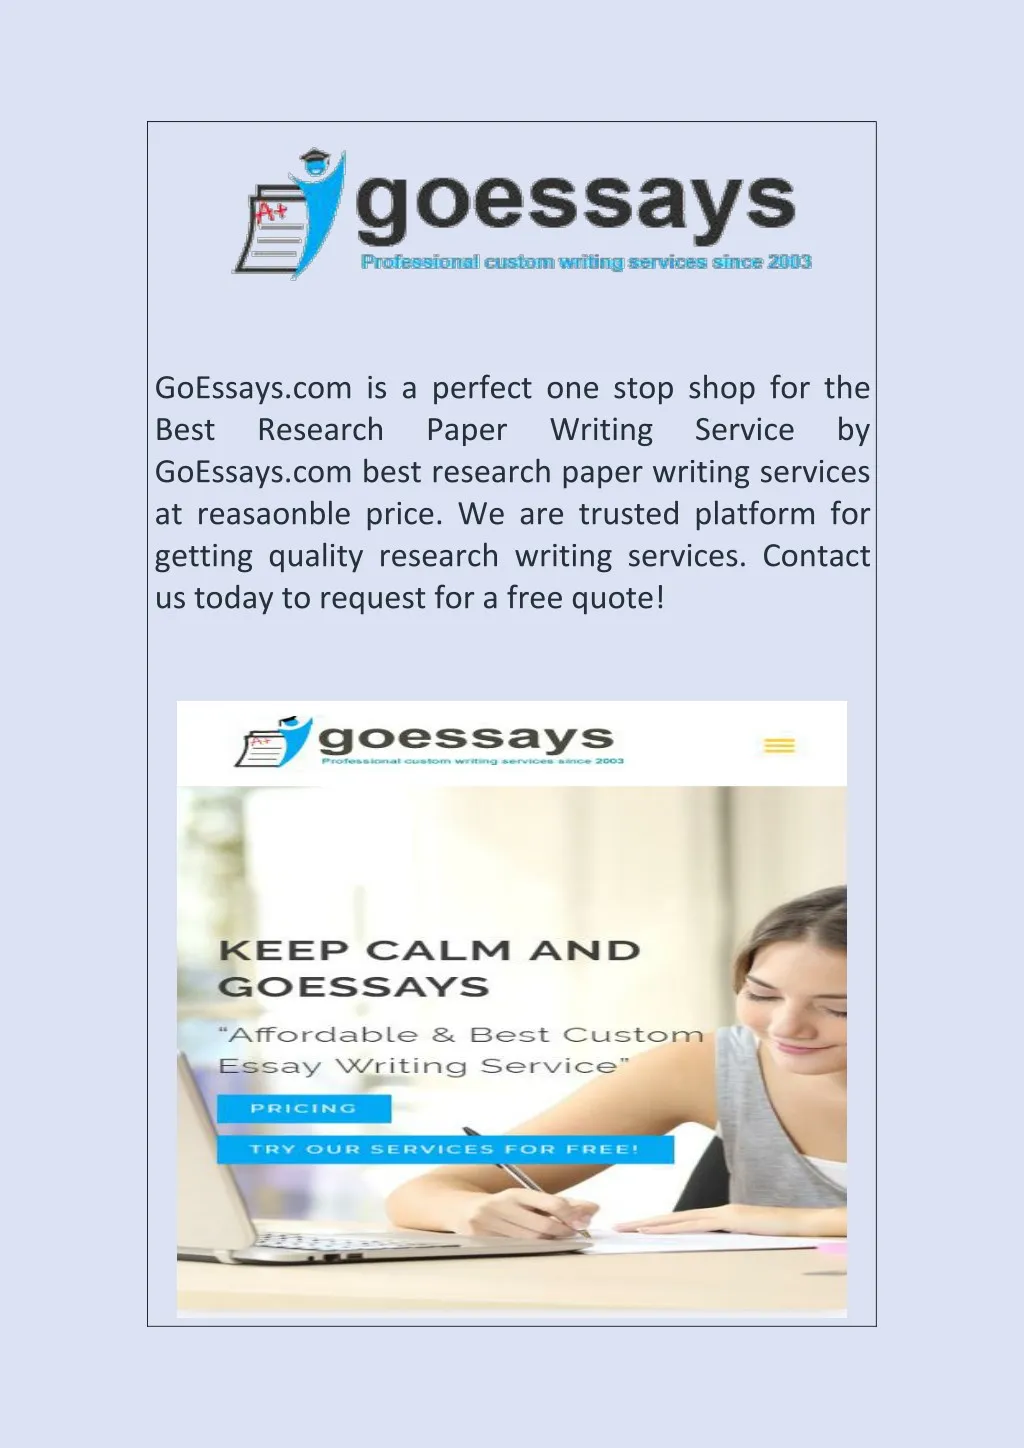 goessays com is a perfect one stop shop